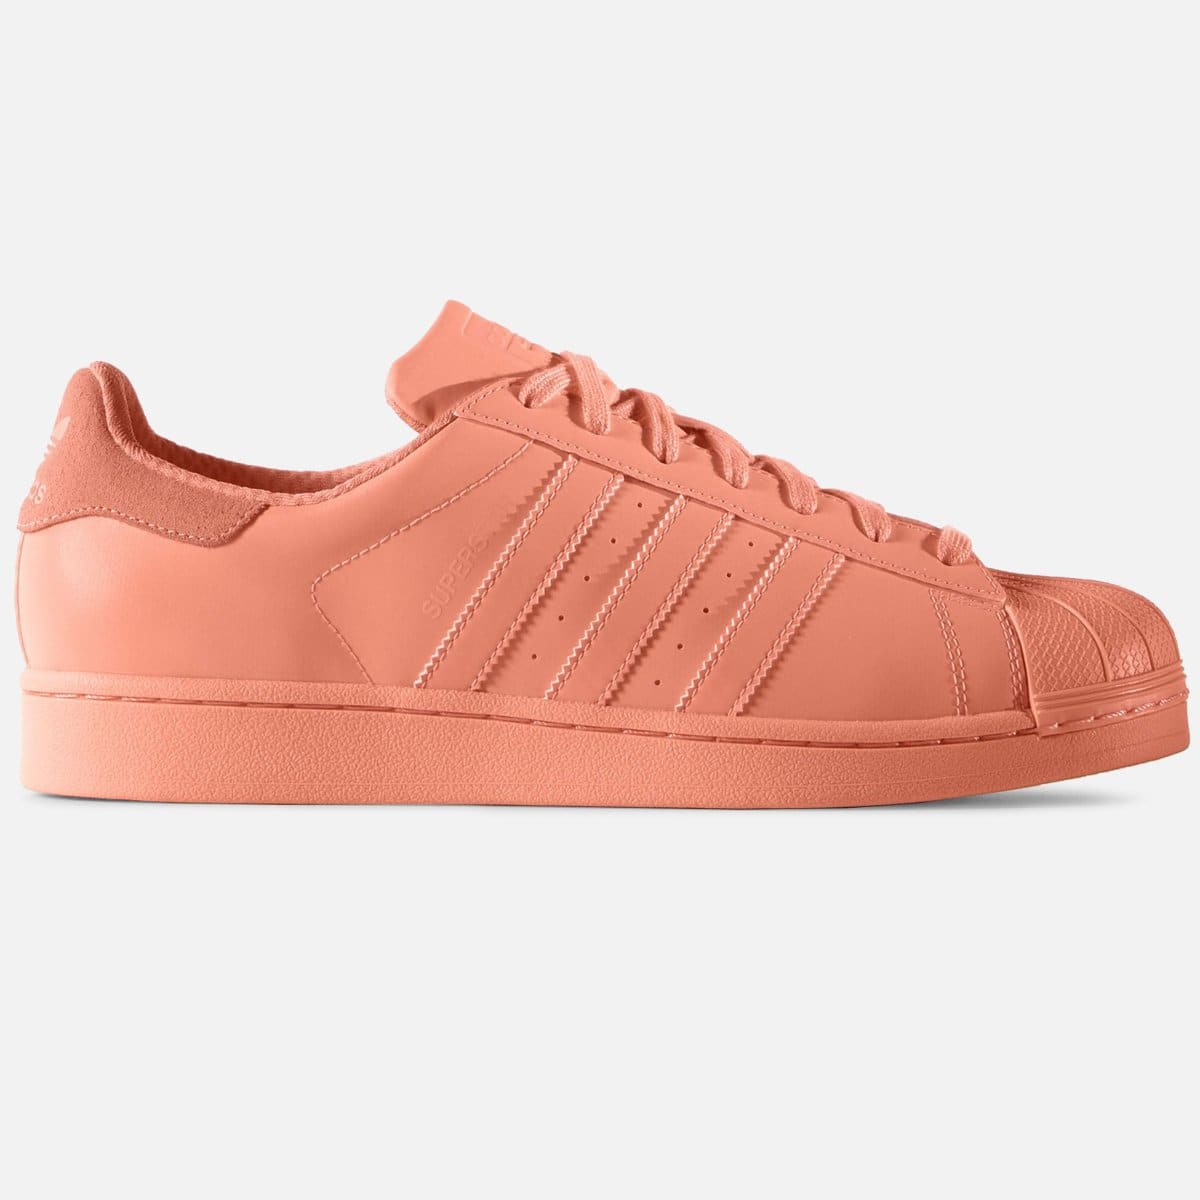 Adidas Superstar Adicolor Reflective - Great Buys Sneakers July 2016 ...